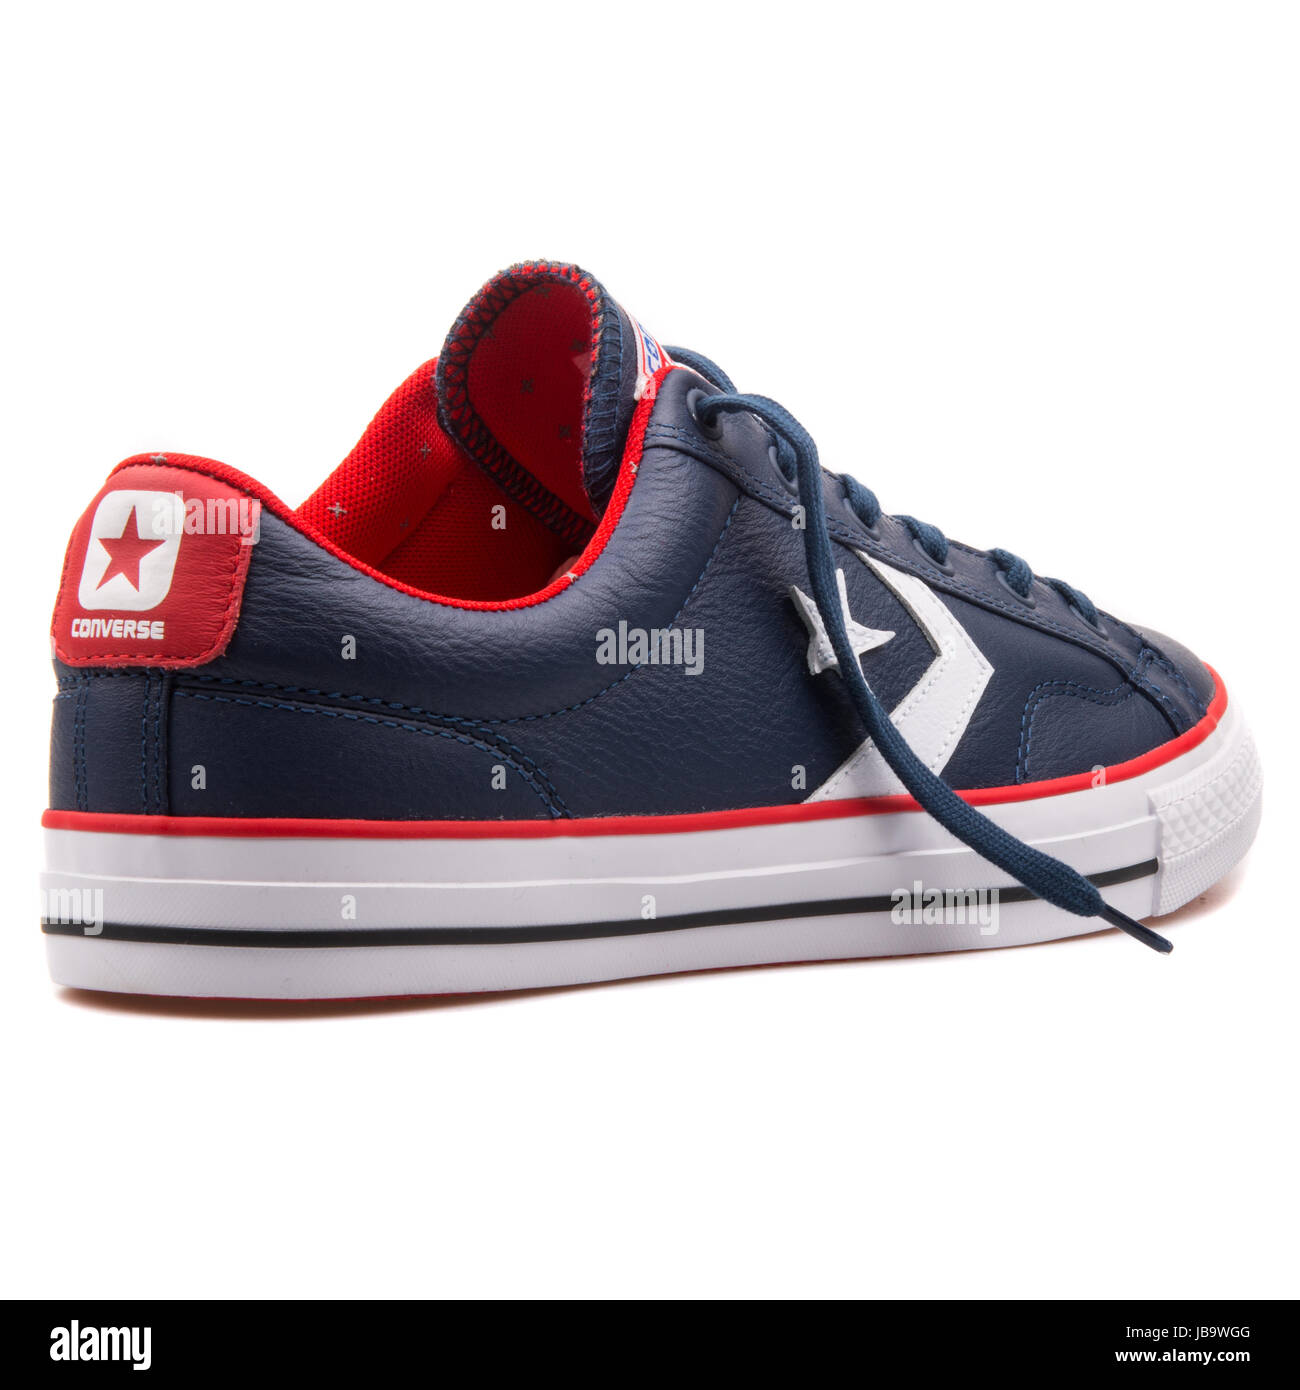 converse blue red